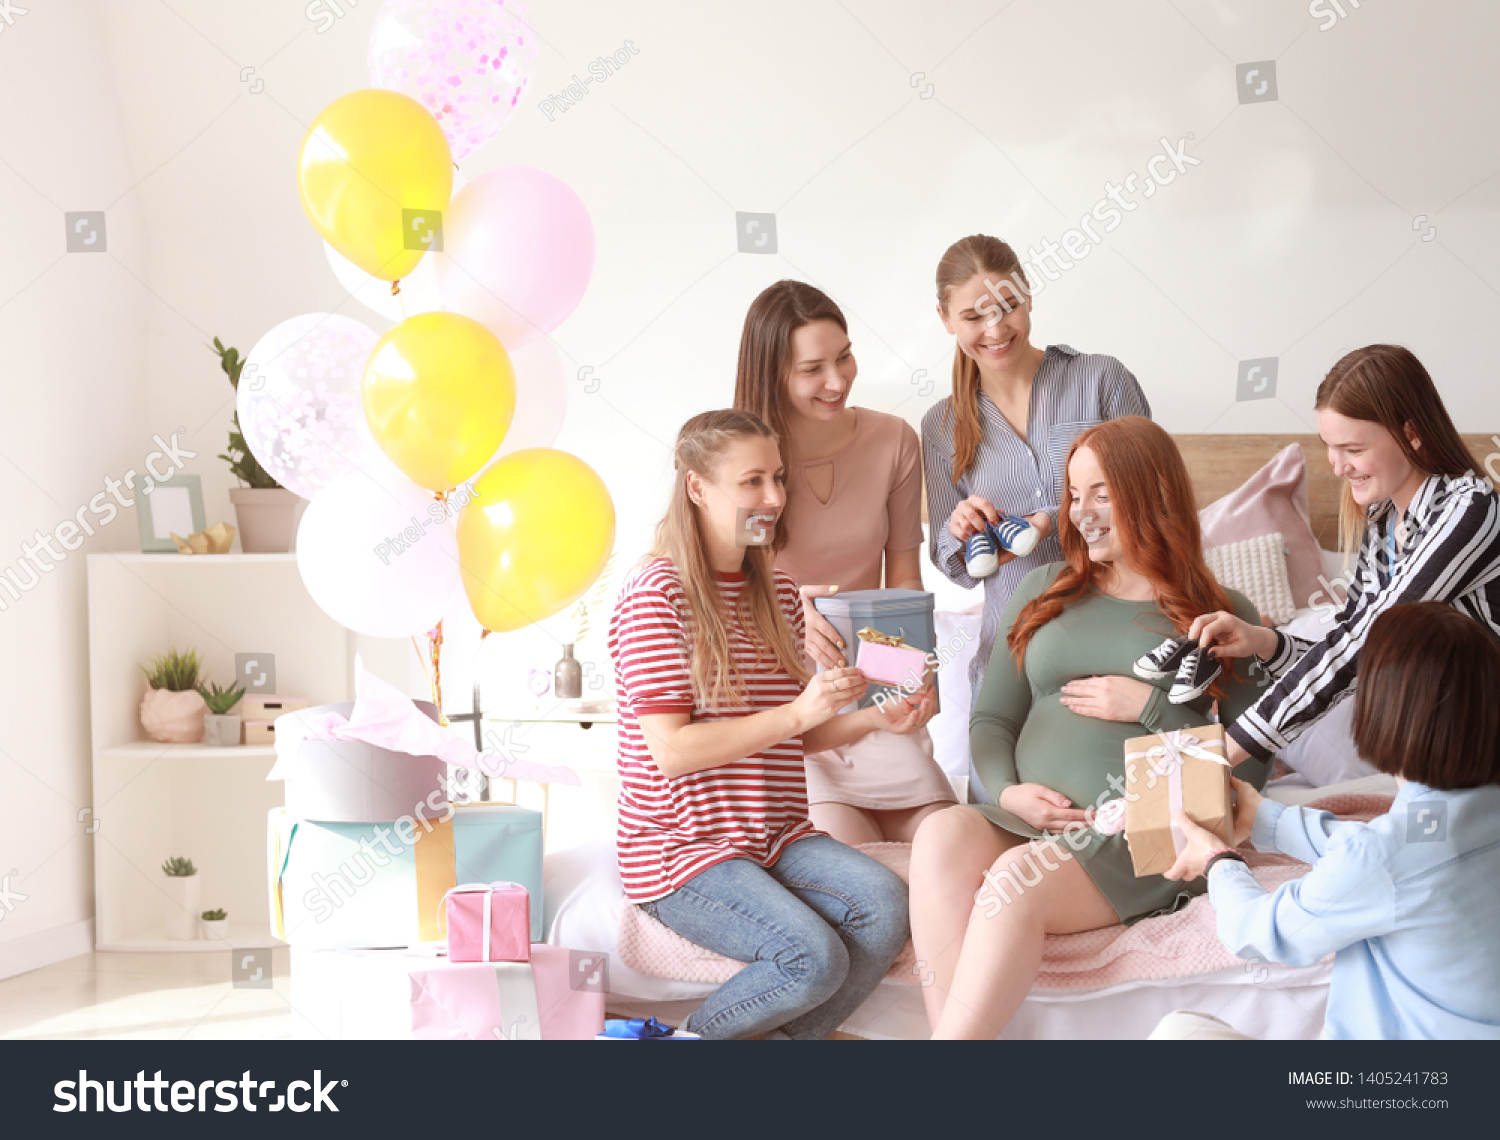 Beautiful pregnant woman and her friends at baby shower party #1405241783